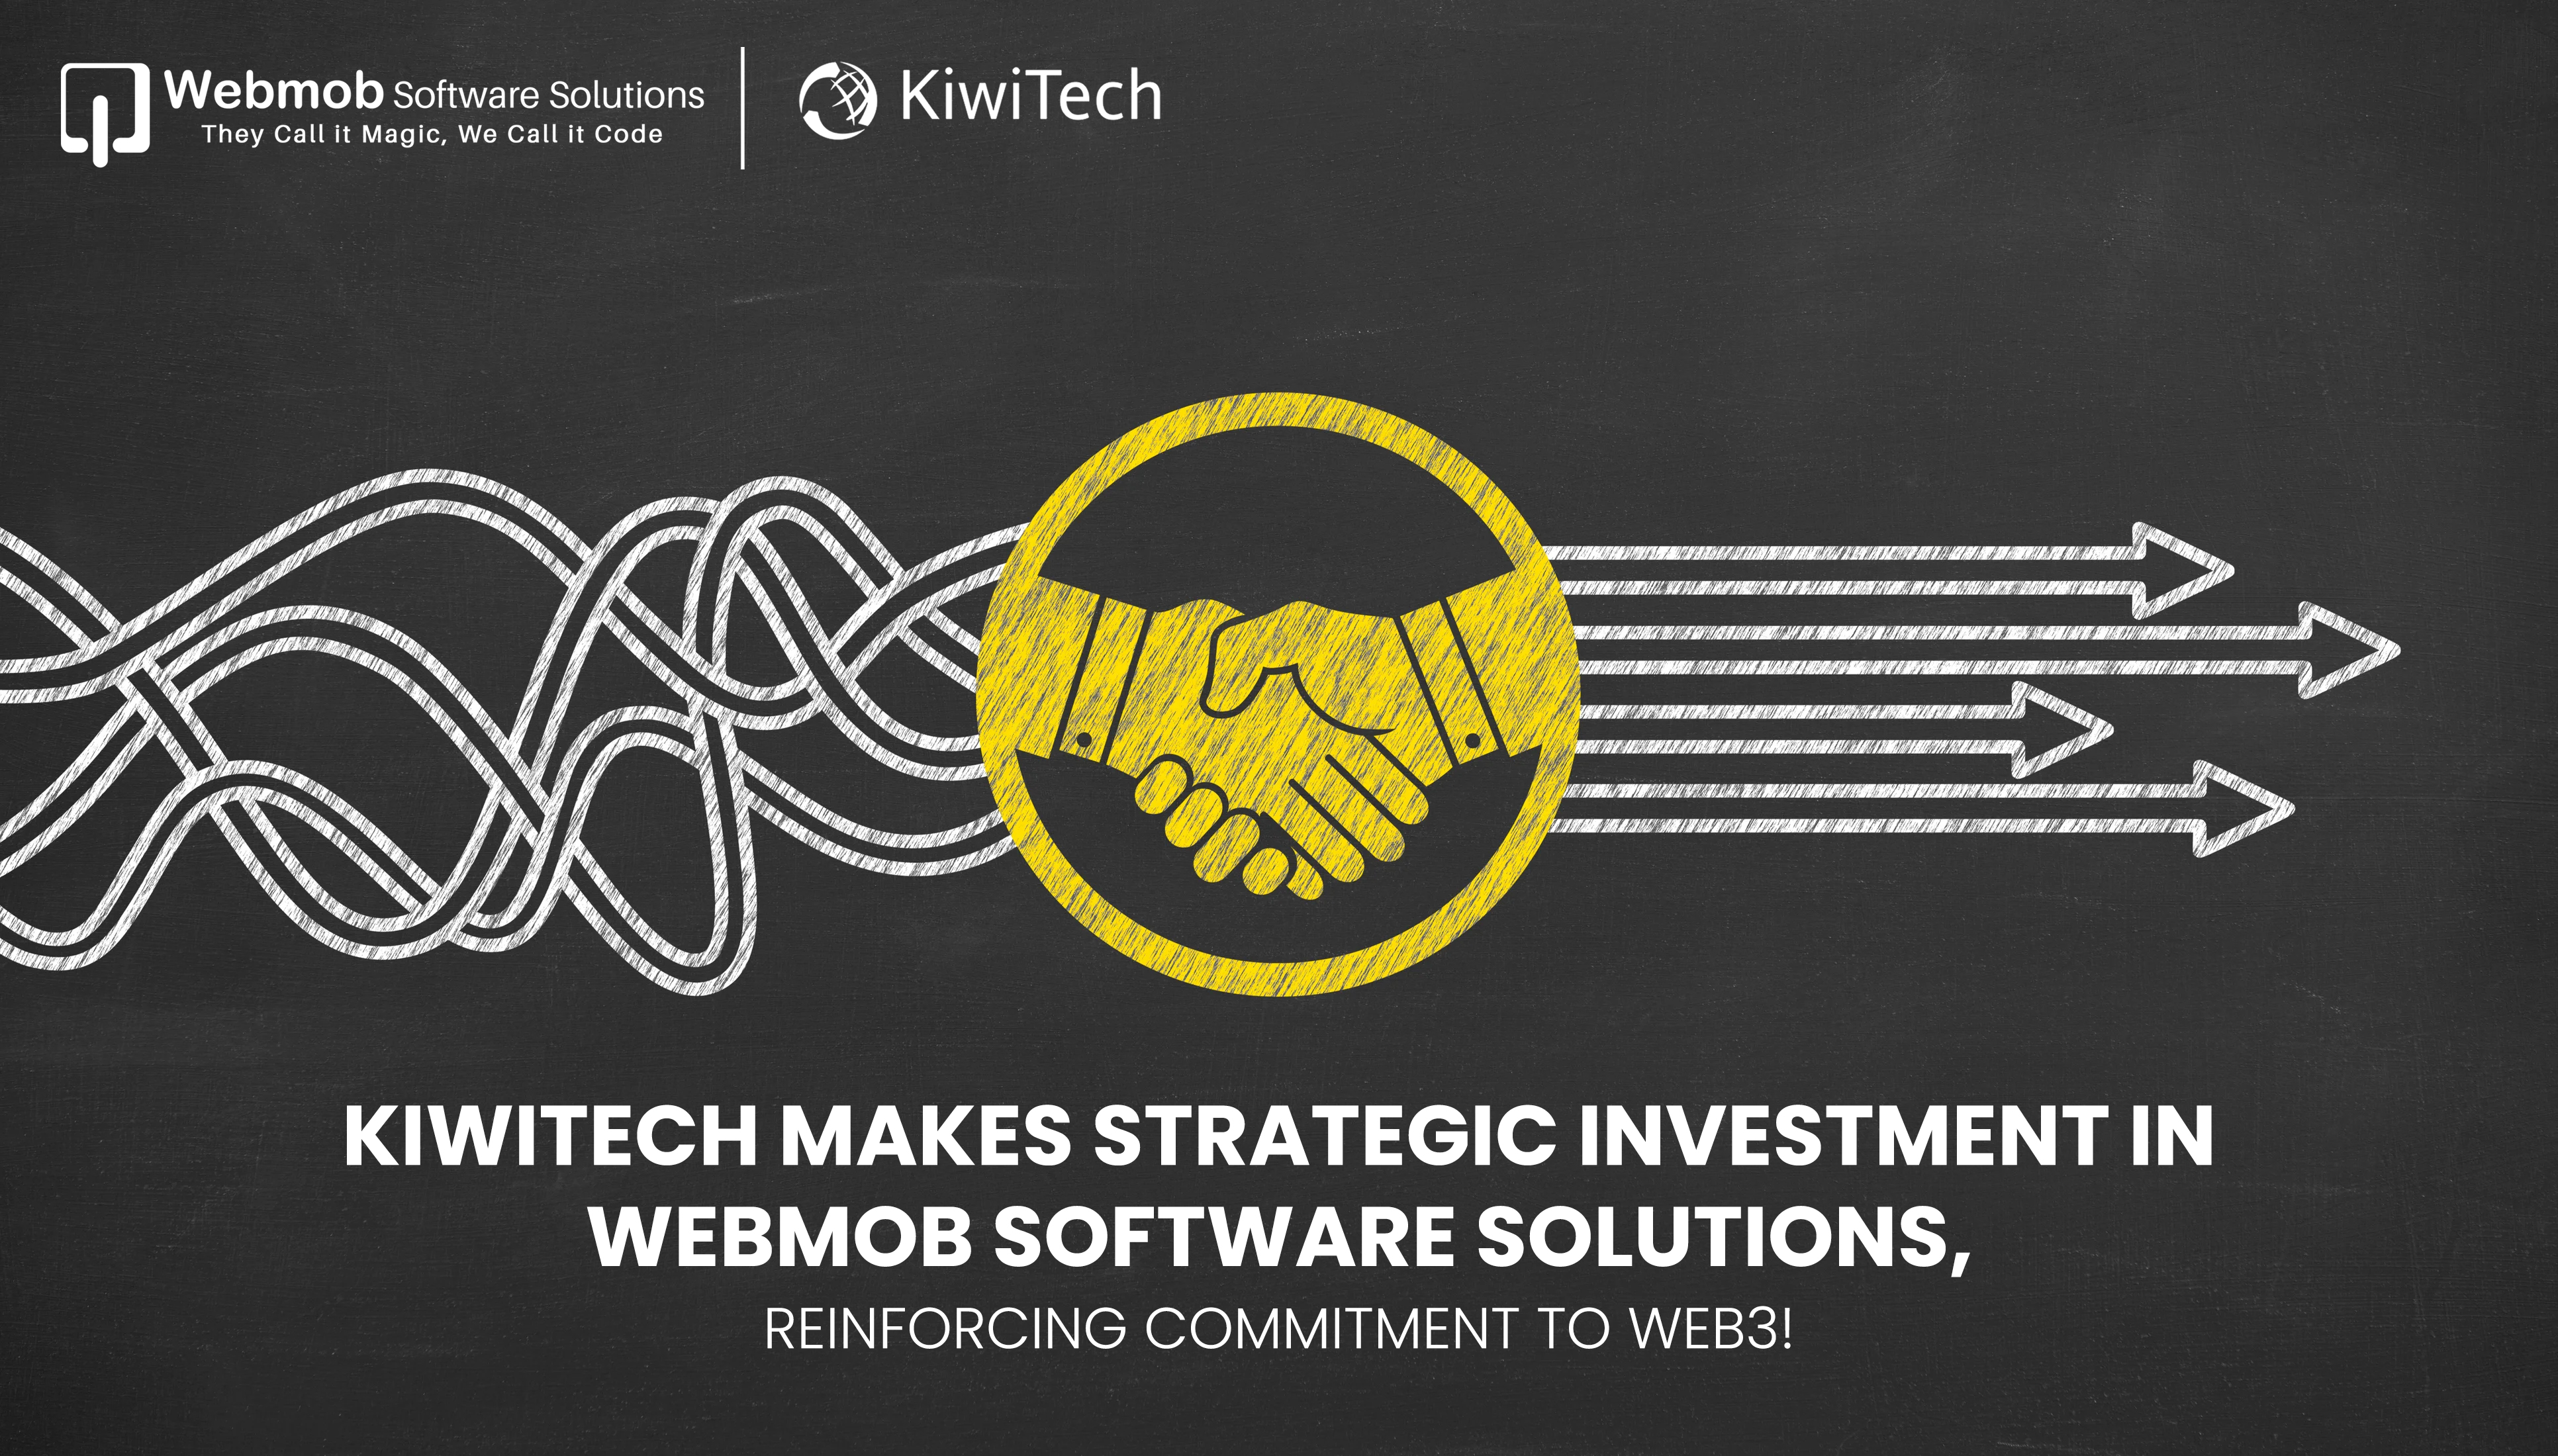 KiwiTech Makes Strategic Investment in WebMob Software Solutions, Reinforcing Commitment to Web3